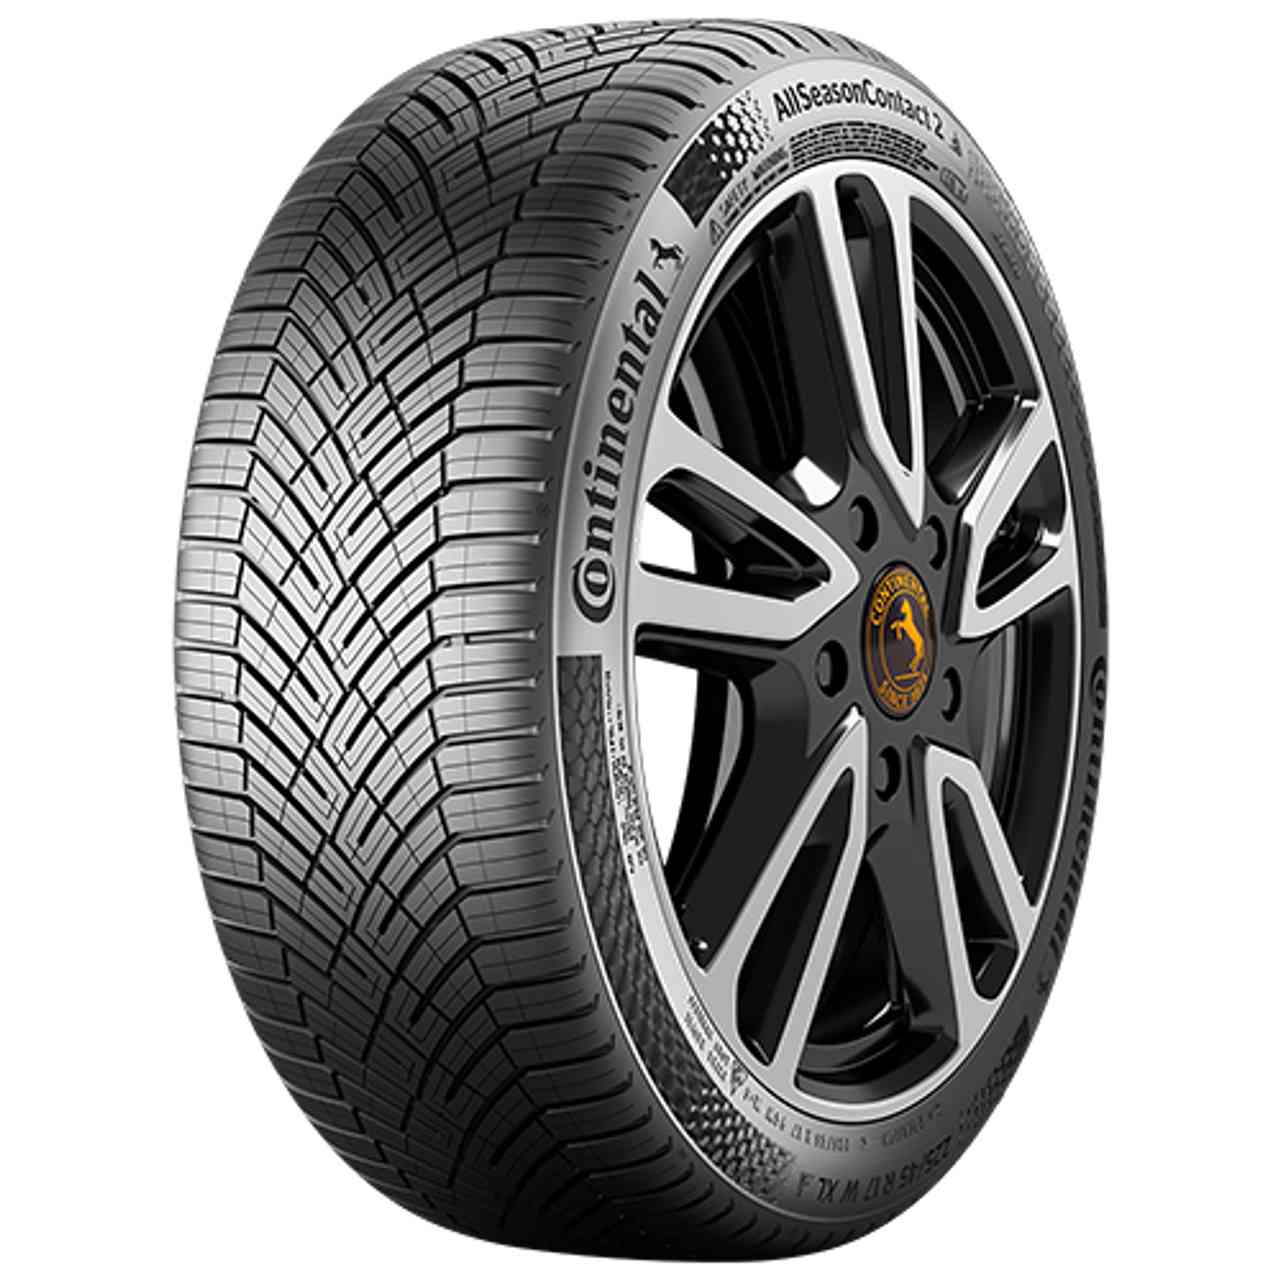 CONTINENTAL ALLSEASONCONTACT 2 (EVc) 225/60R18 100H BSW